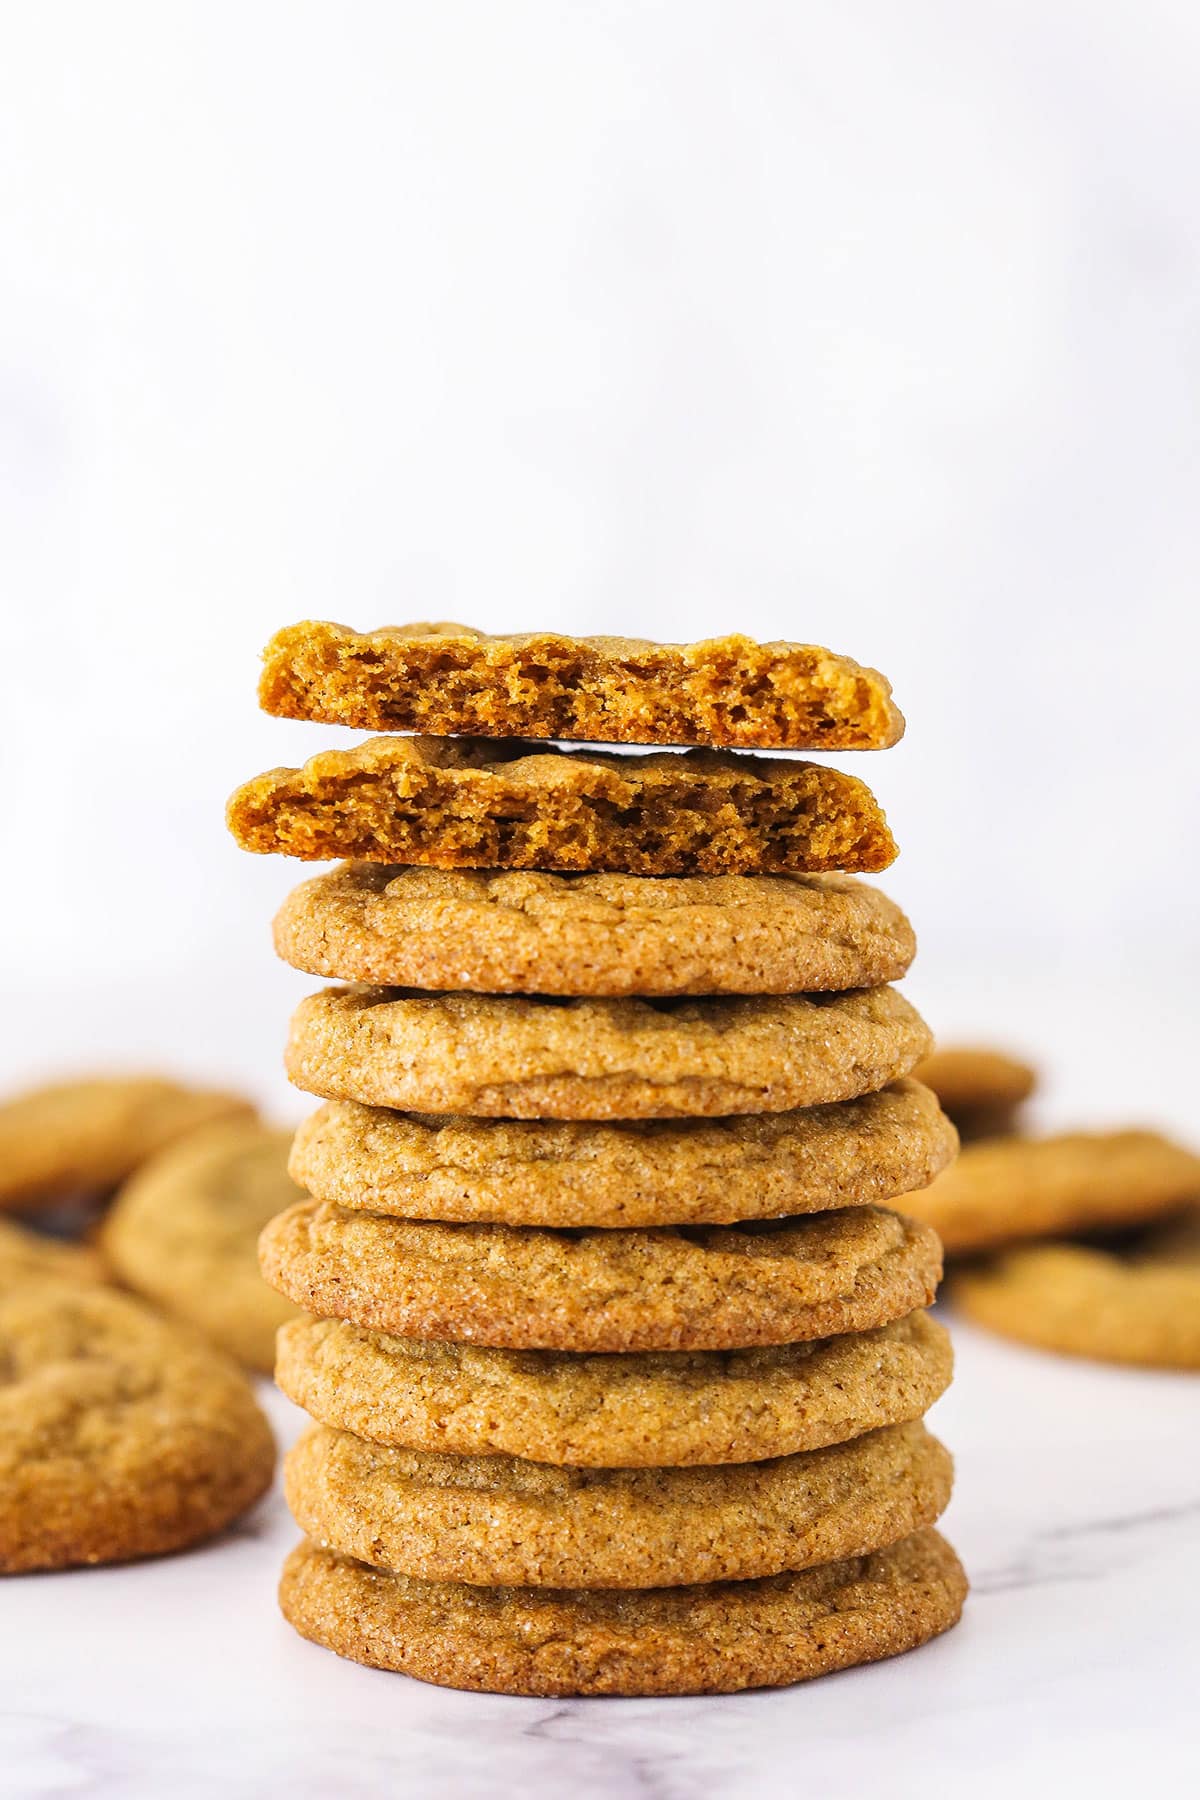 A Tall Stack of Molasses Cookies With the Top one Cut in Half